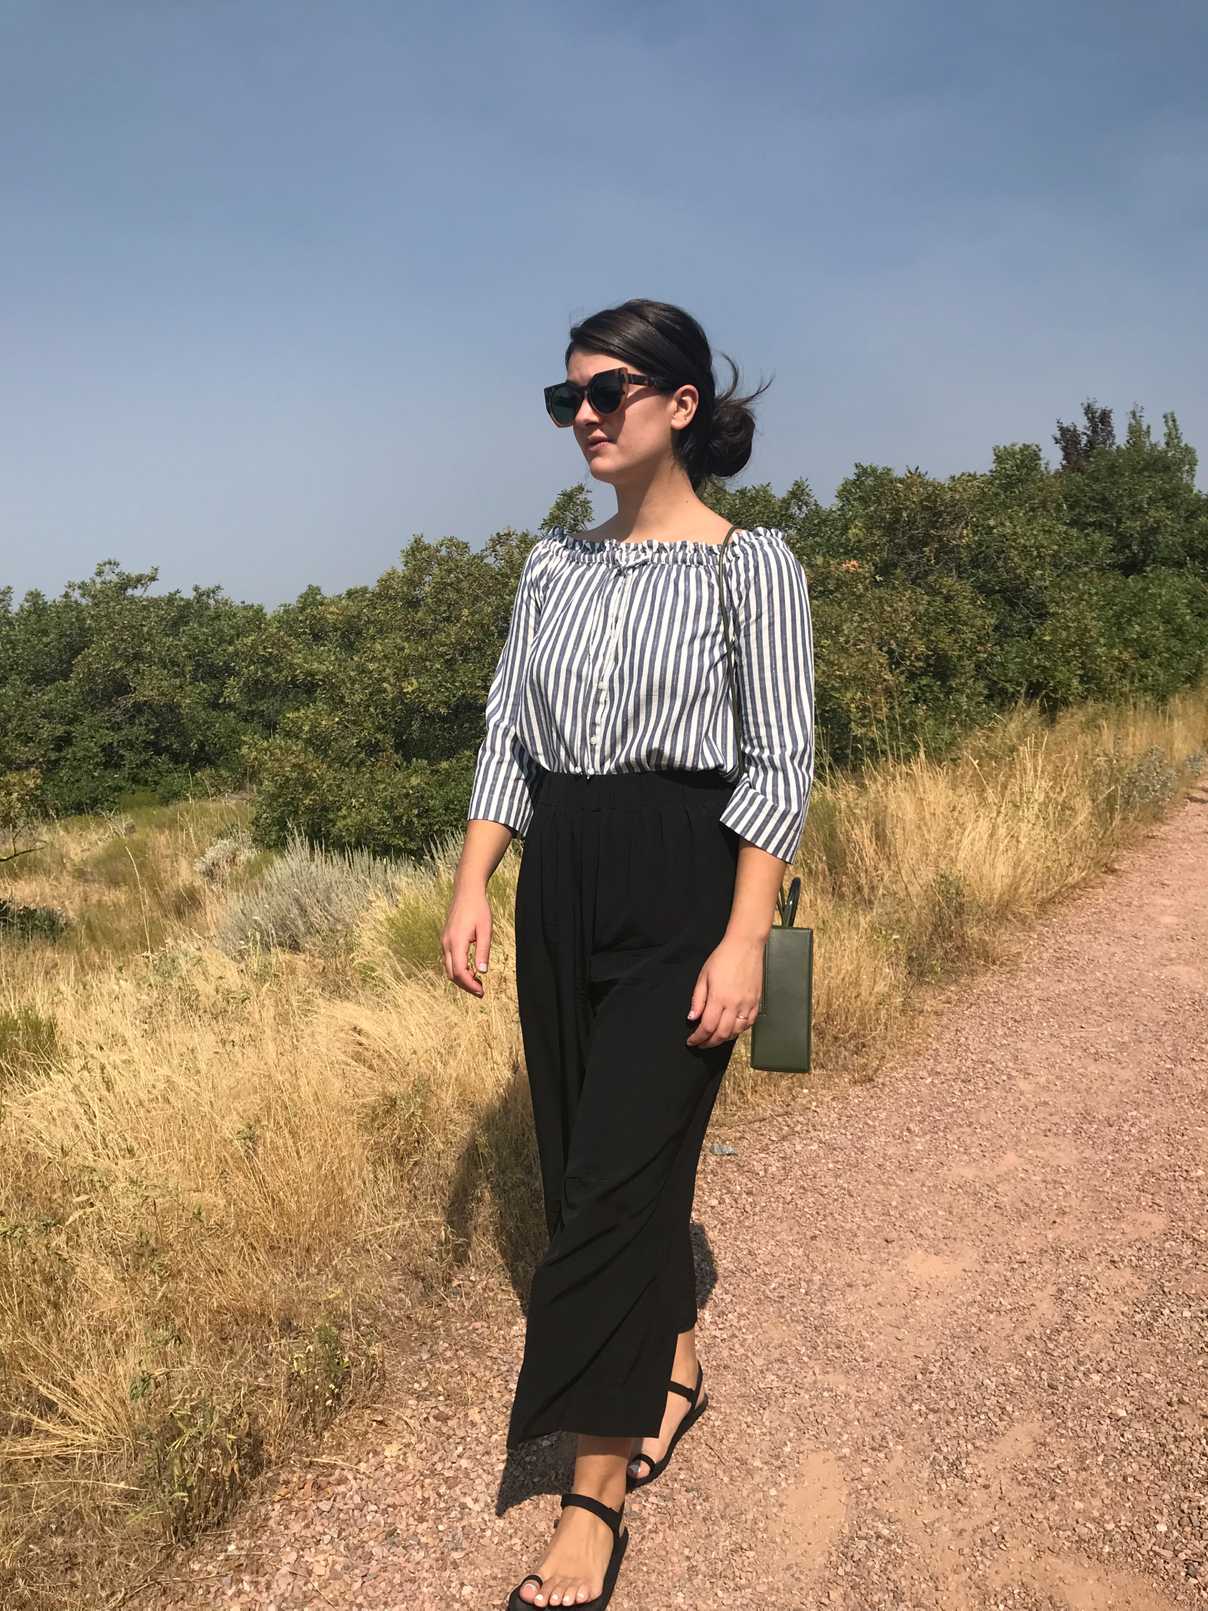 Sara wearing blue and white striped shirt, black wide leg pants, and black Xero Shoes sandals